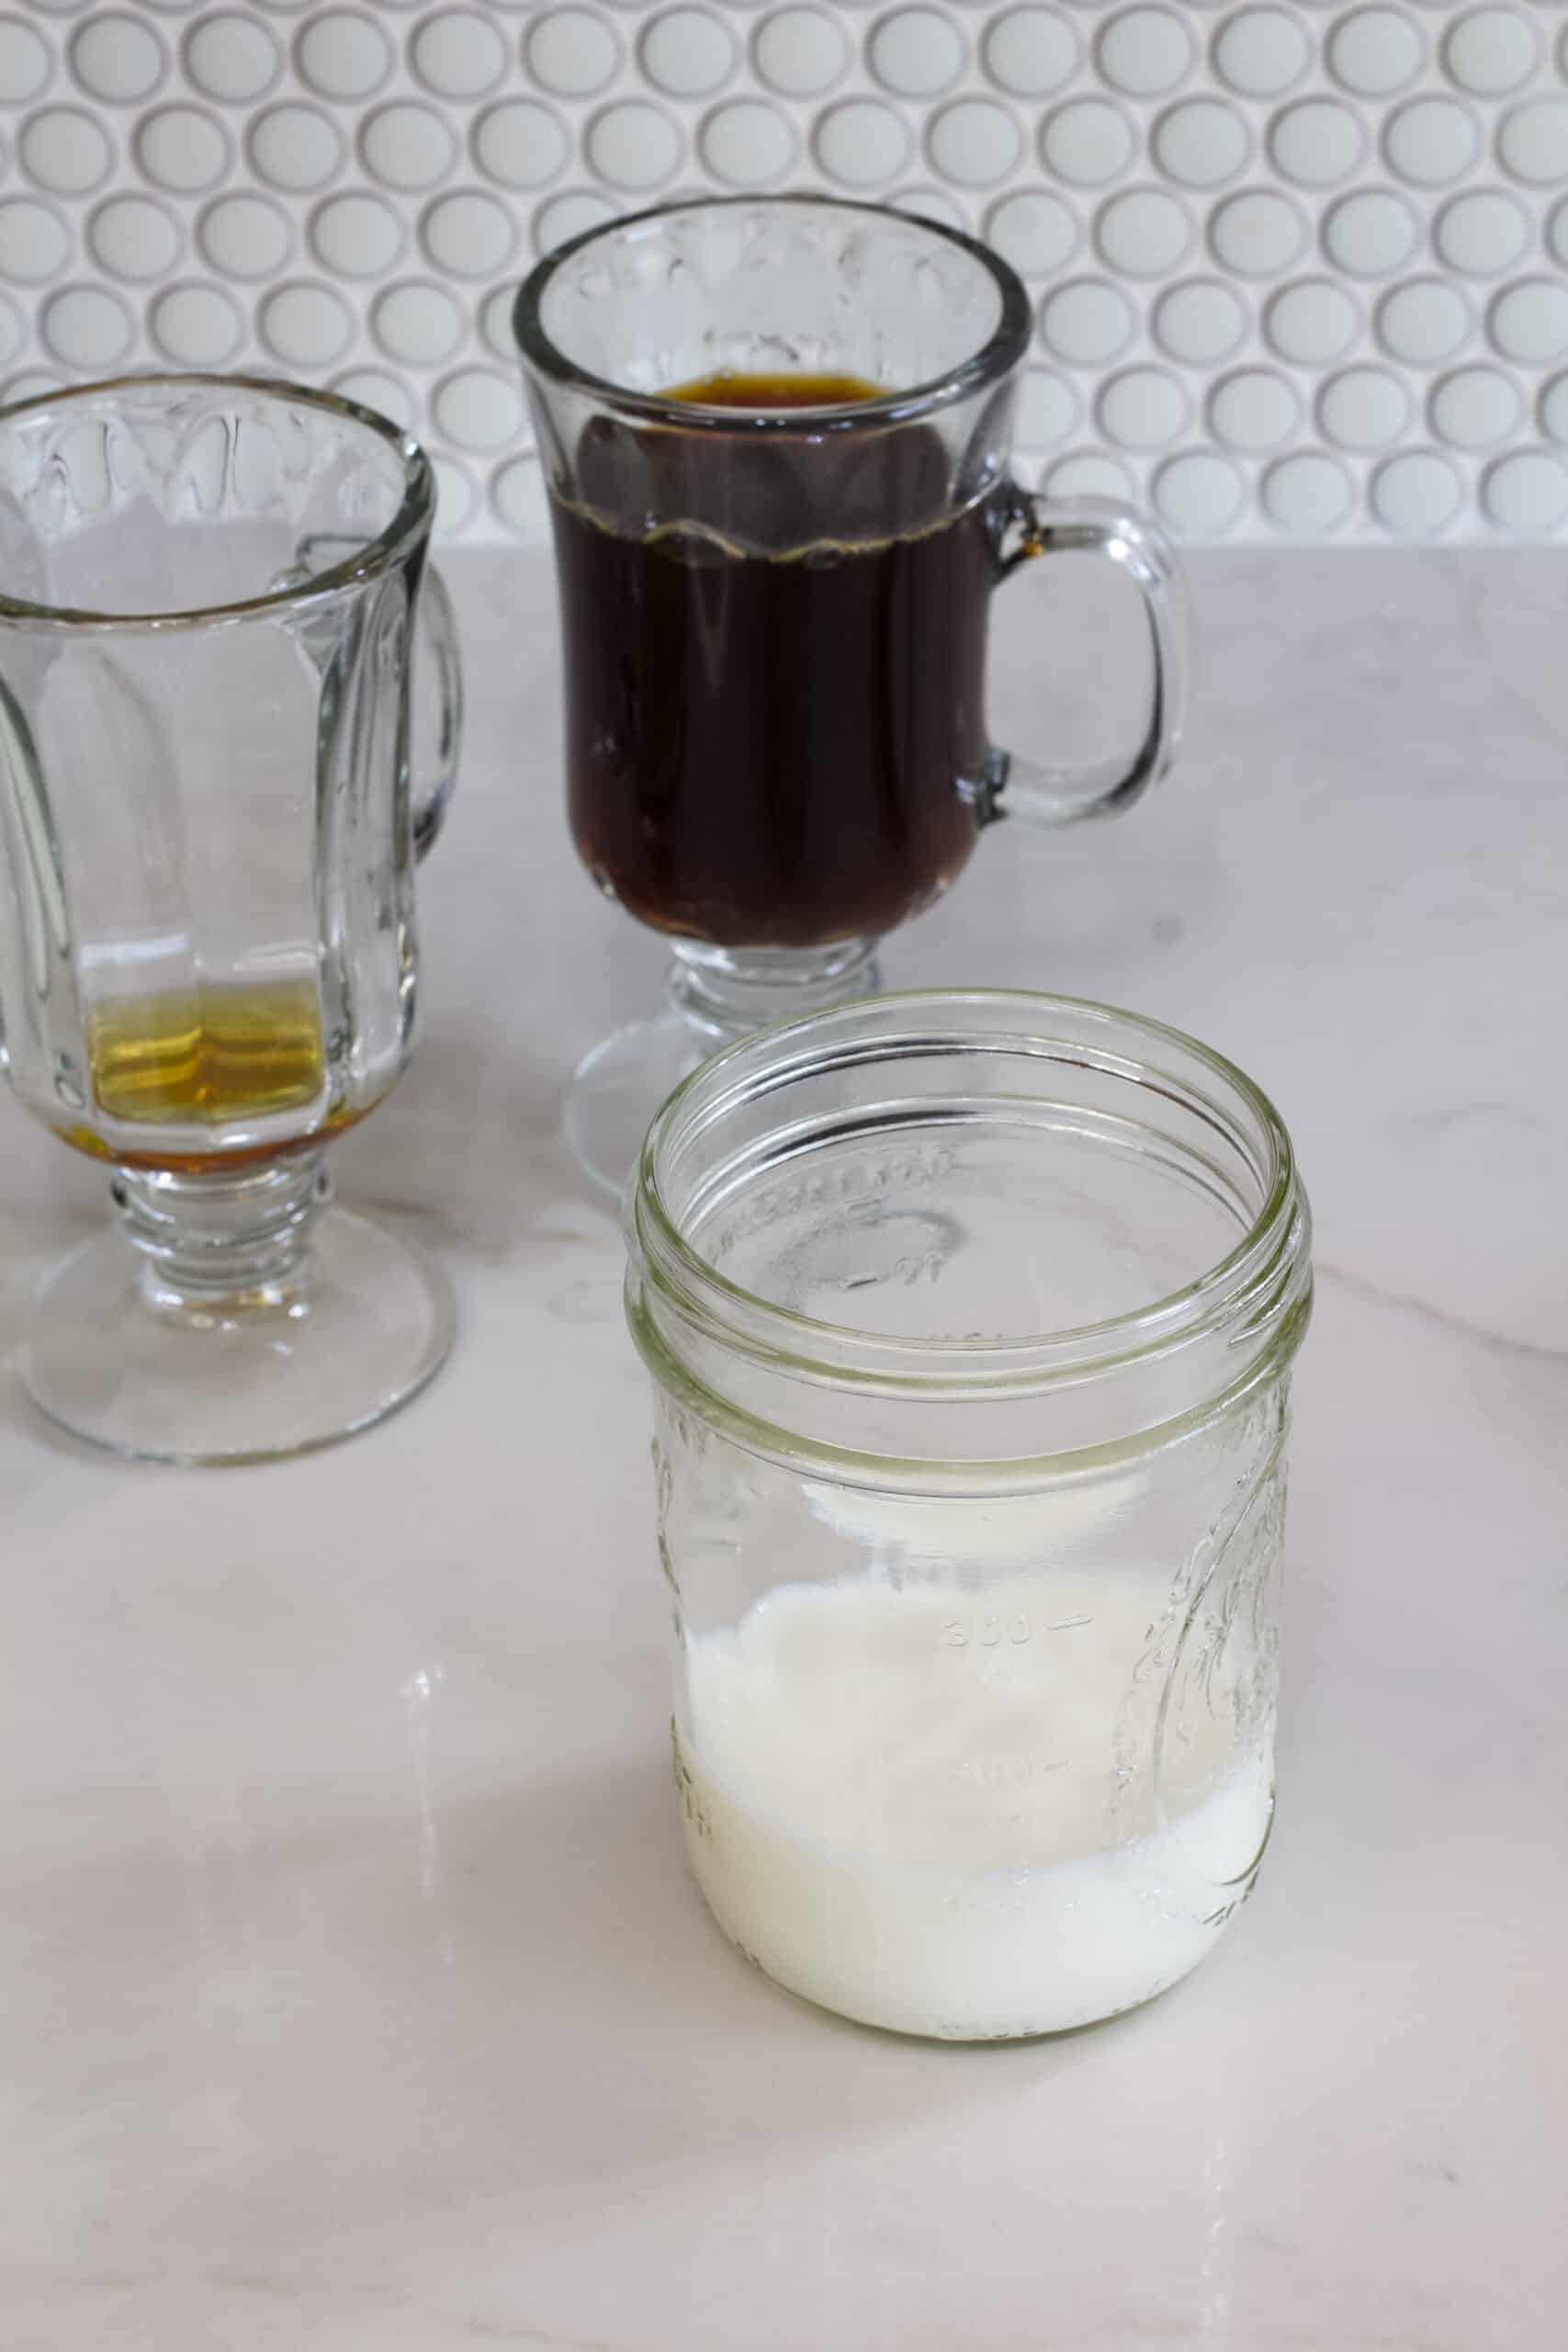 A cup of black coffee and a cup with maple syrup in it in the background and a mason jar with a little milk in it in the foreground.